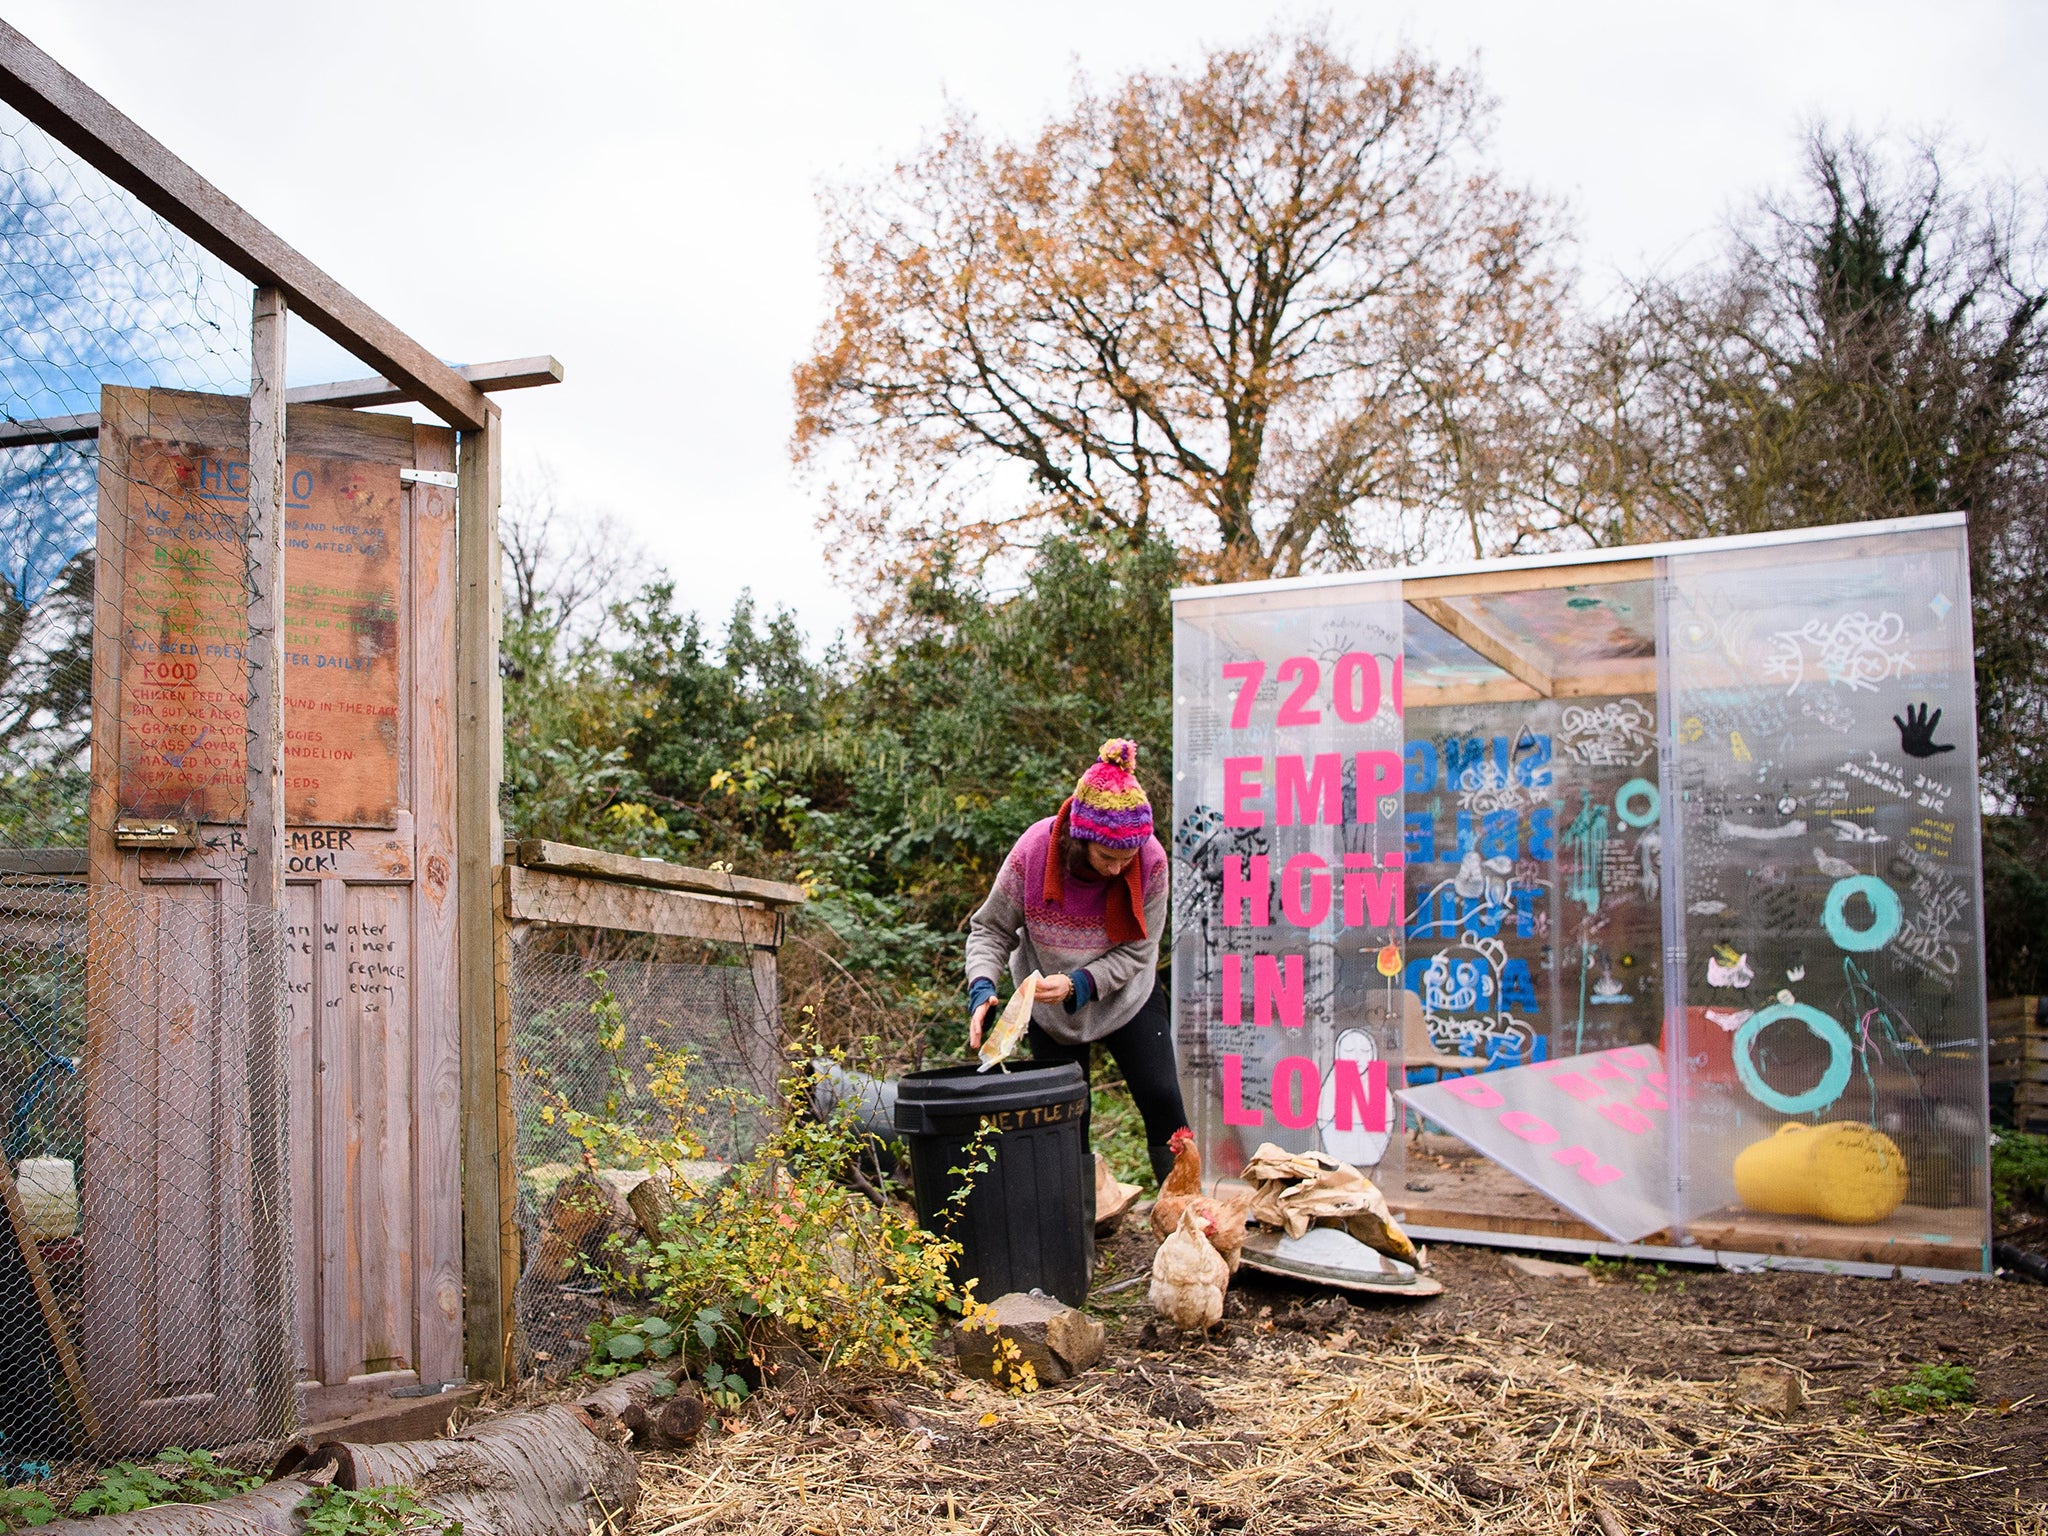 Chickens wander around within the 'Grow Heathrow' protest camp, in Sipson, near Heathrow airport .